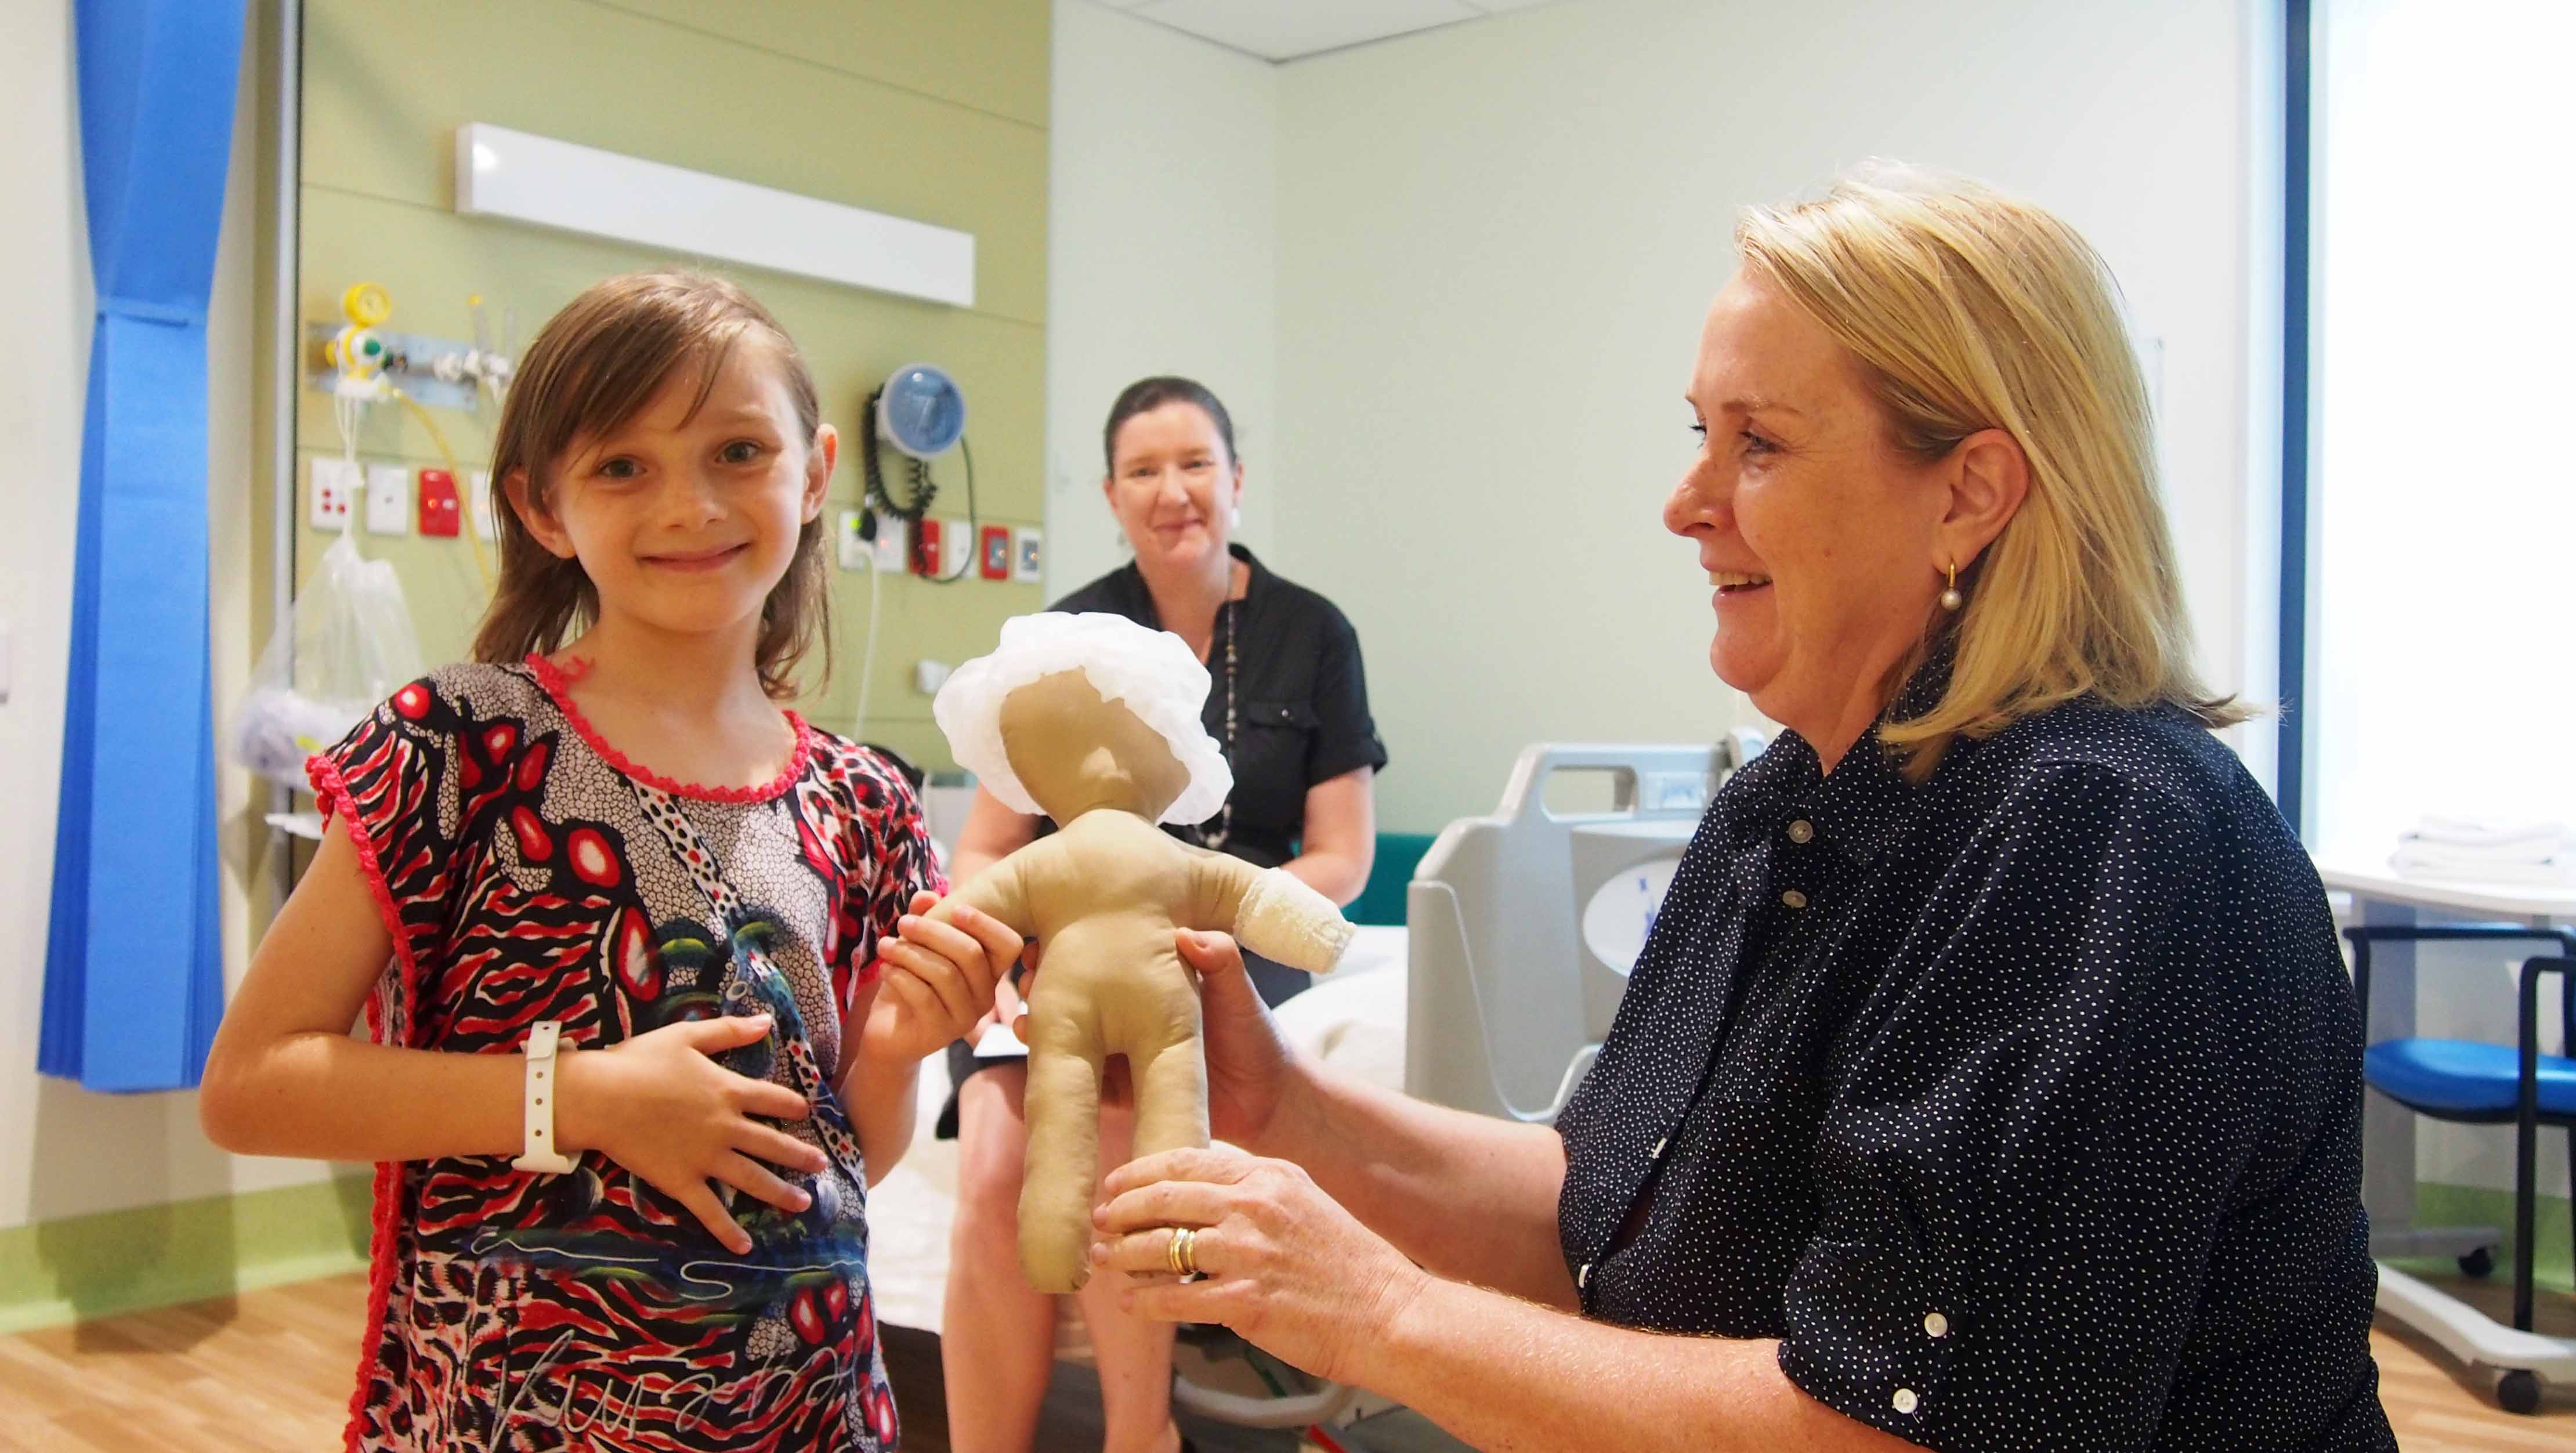 Nurse with young patient during a hospital tour